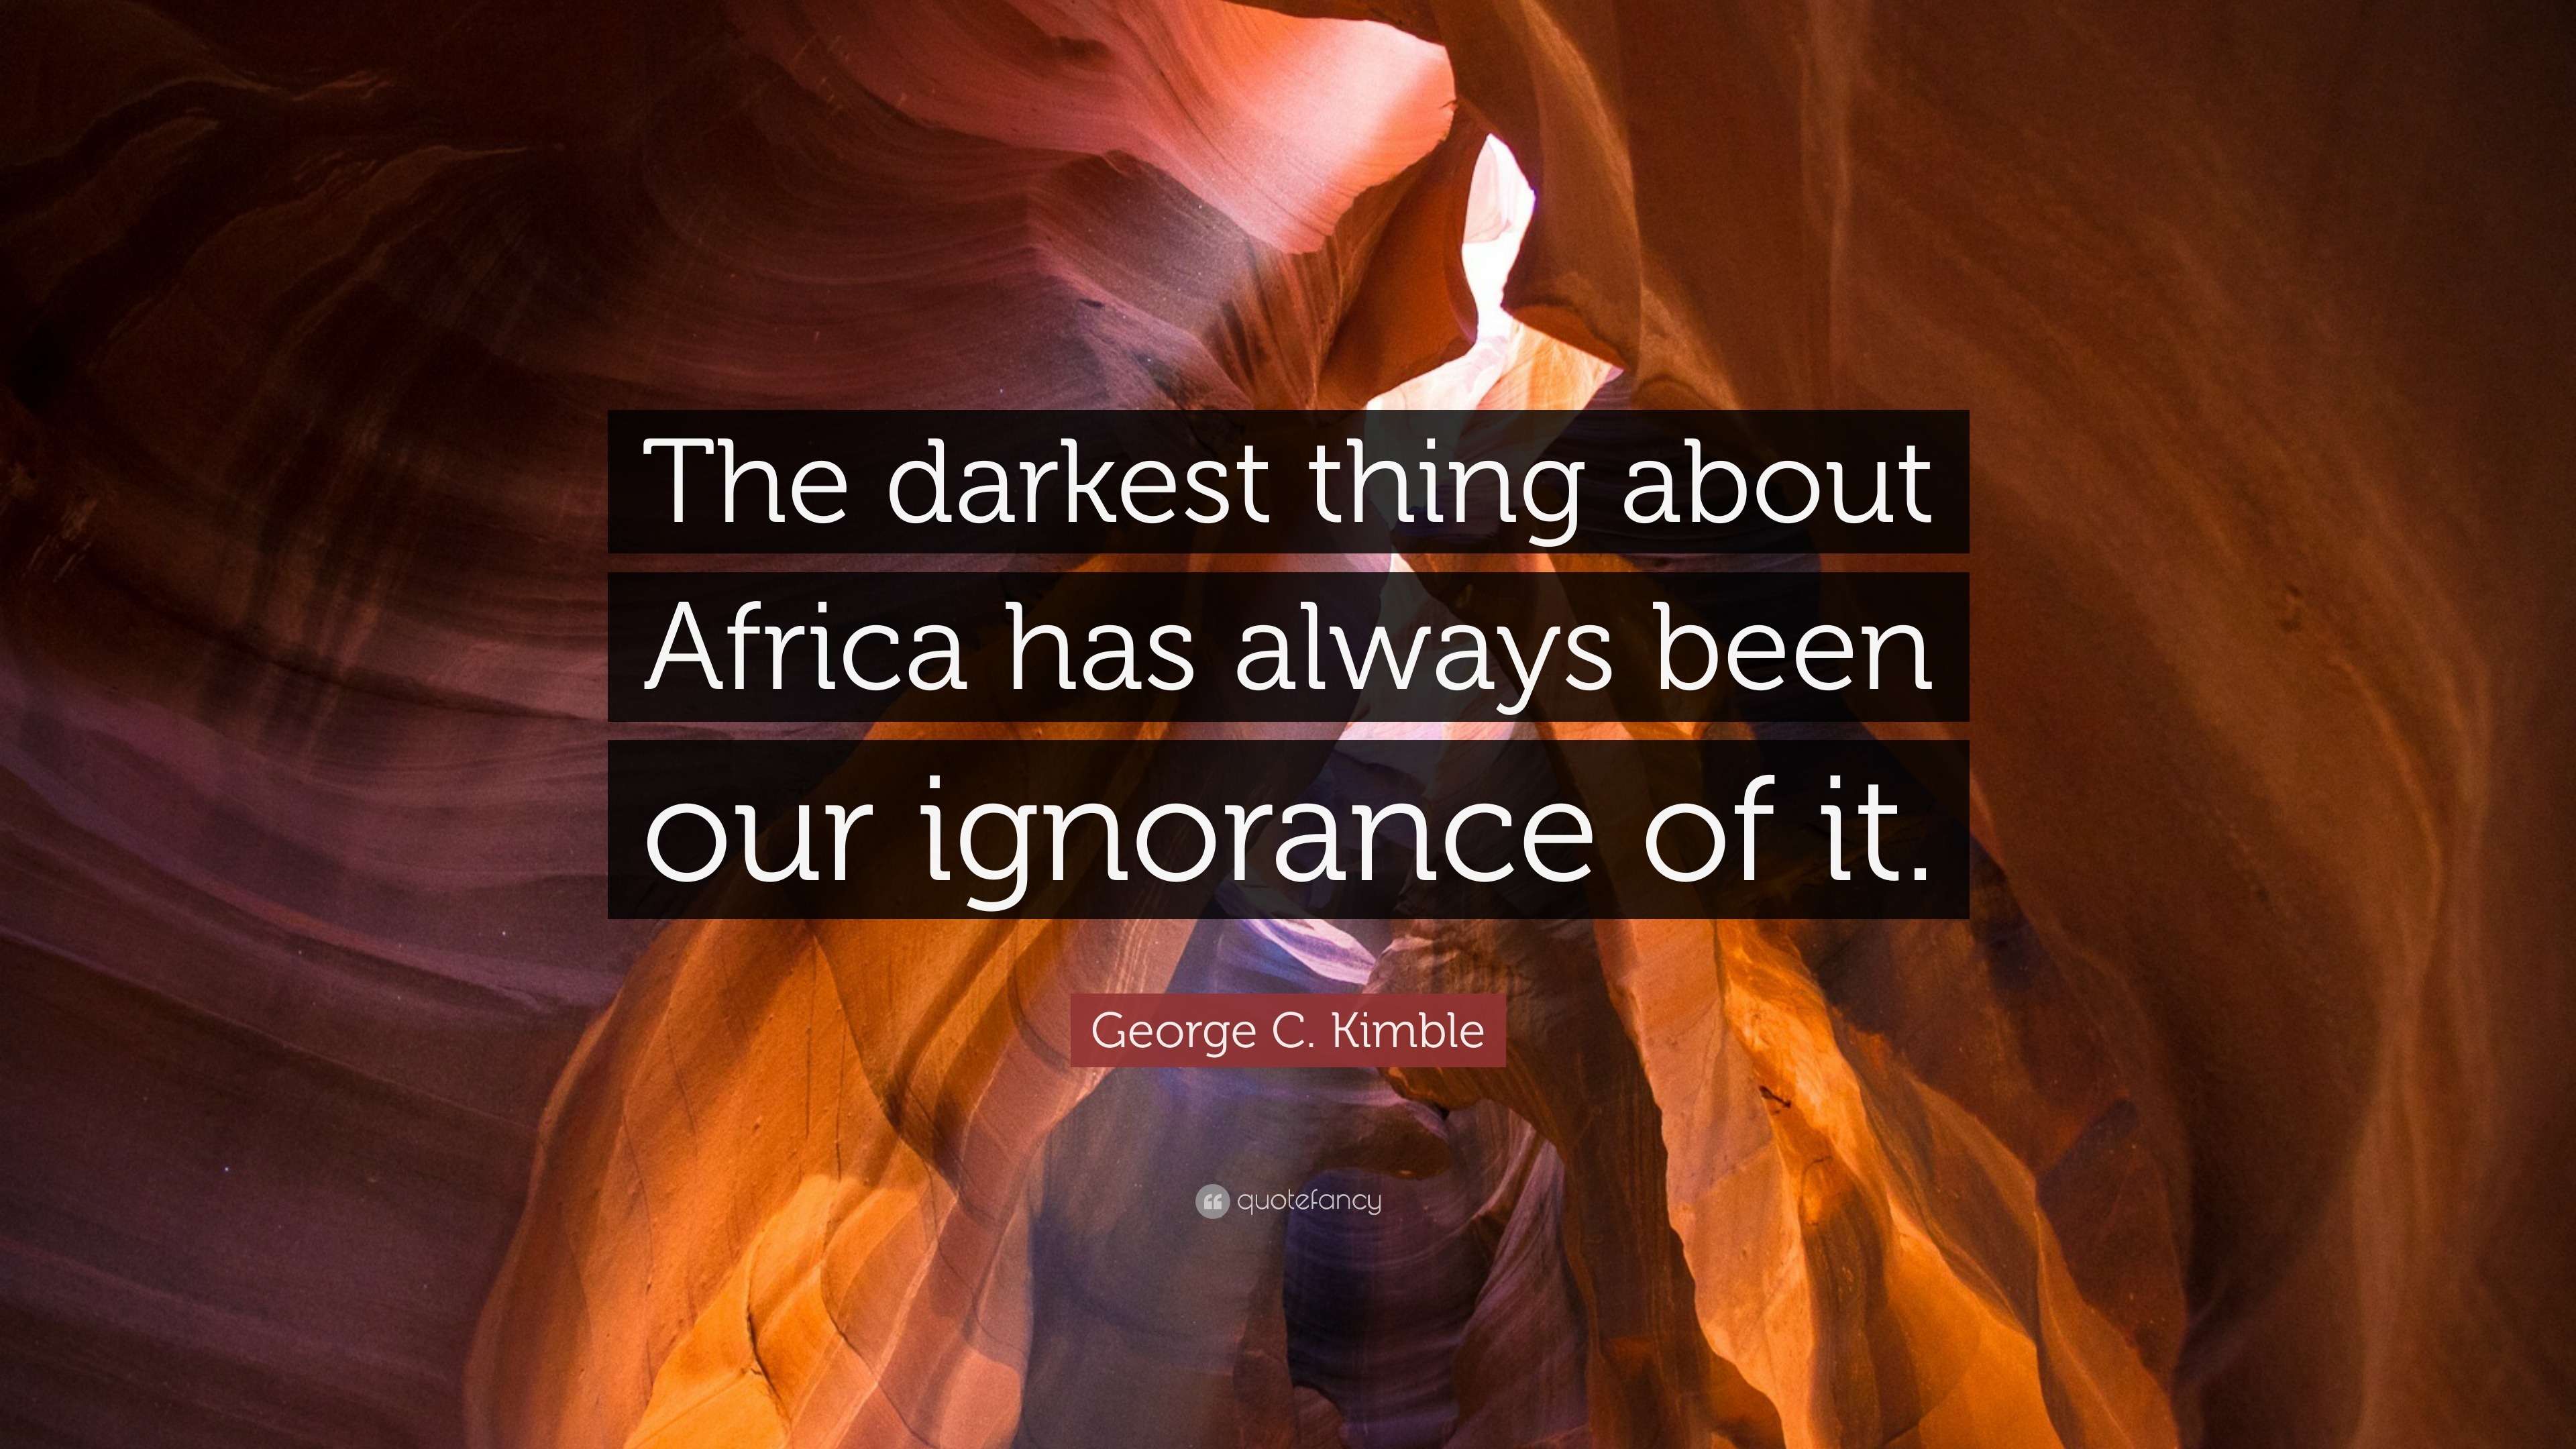 George C. Kimble Quote: “The darkest thing about Africa has always been ...